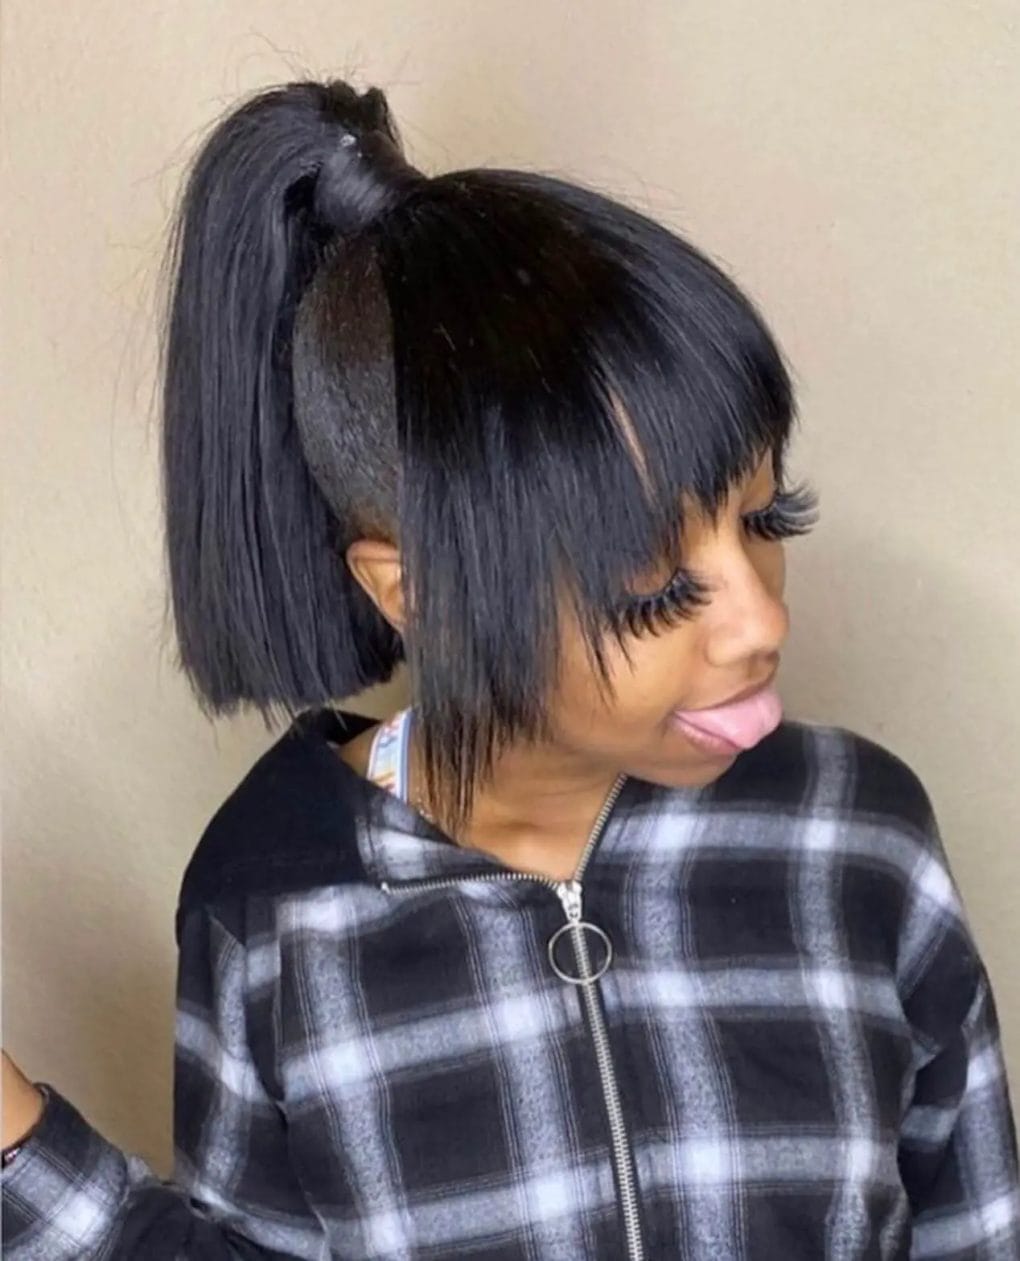 Trendy high ponytail with a textured bob cut in natural black, featuring straight-across bangs for a youthful edge.